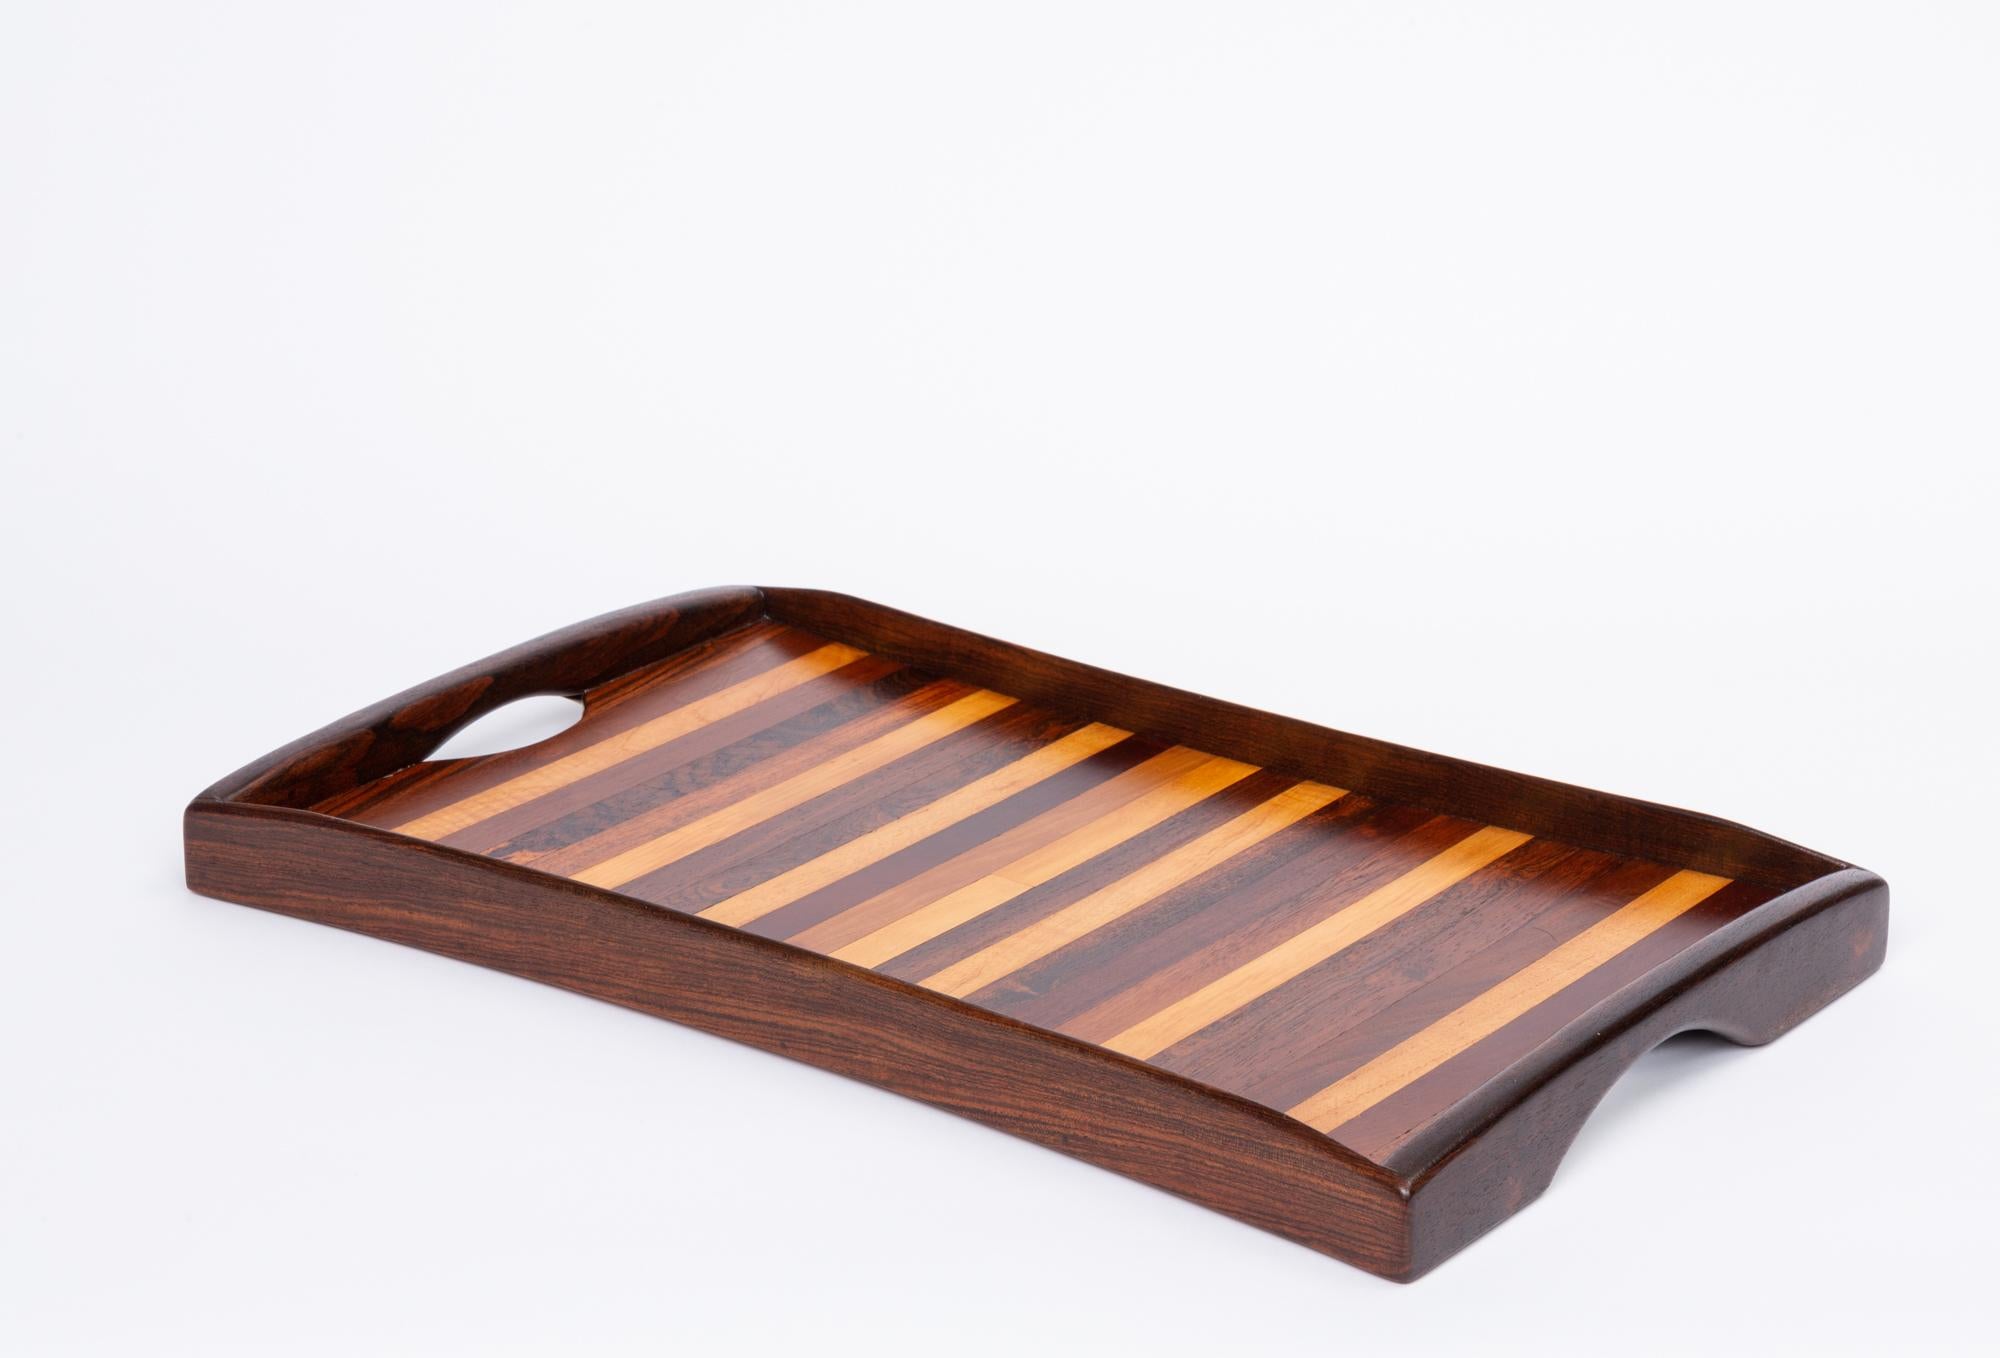 Rosewood tray by Don Shoemaker for Señal, designed and produced in Mexico. This examples have slightly bowed edges framed by four curved pieces of solid rosewood. There is a cut-out handle on either side of the tray. The surface features an inlay